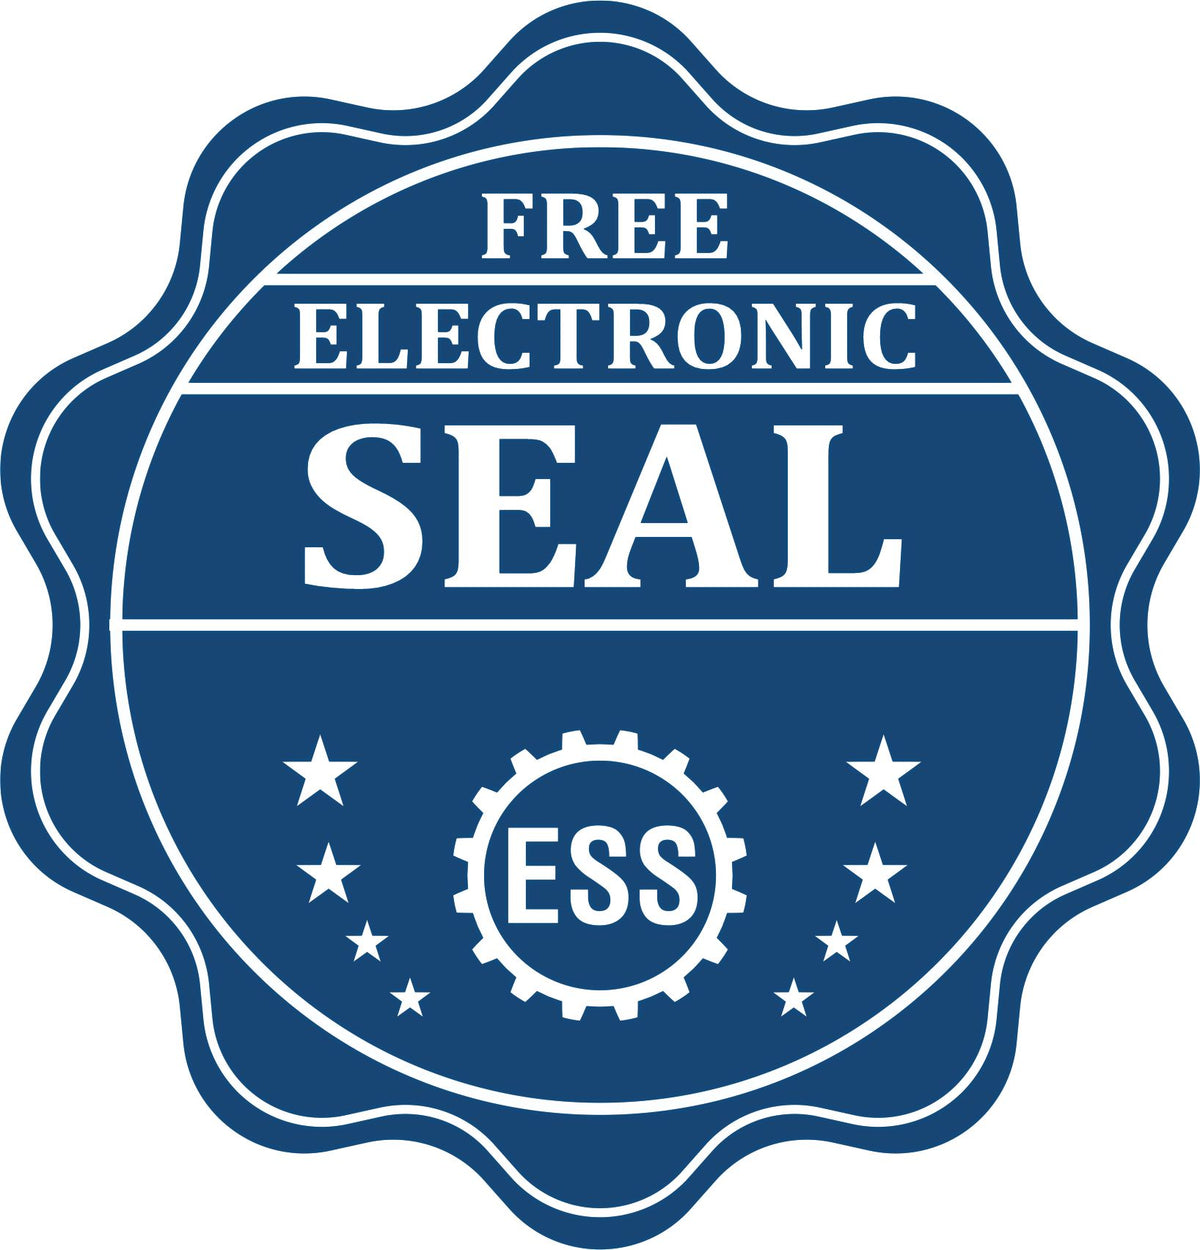 A badge showing a free electronic seal for the Hybrid Massachusetts Engineer Seal with stars and the ESS gear on the emblem.